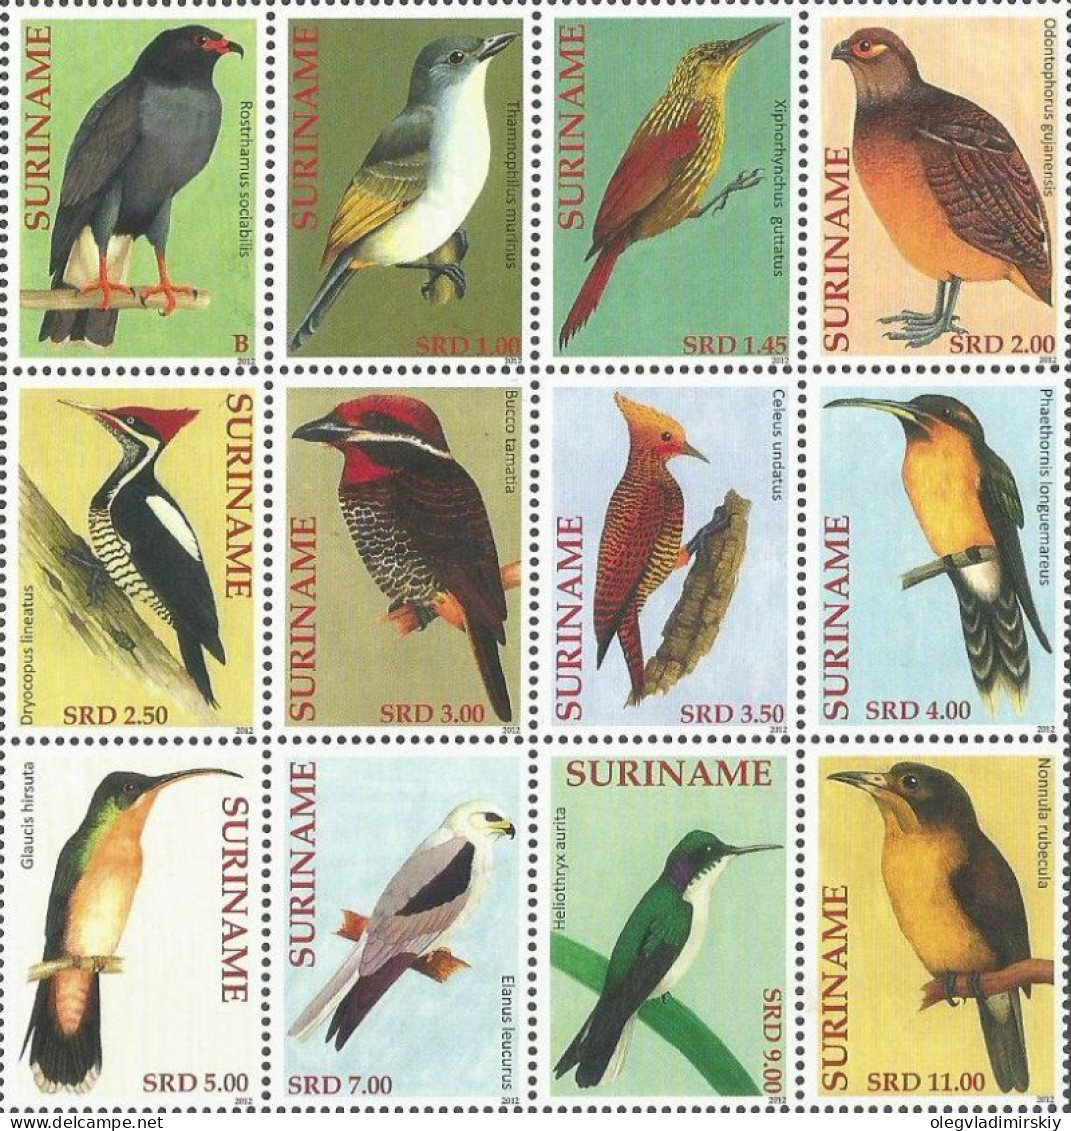 Suriname Surinam 2012 Tropical Forest Birds Set Of 12 Stamps In Block 3x4 MNH - Songbirds & Tree Dwellers